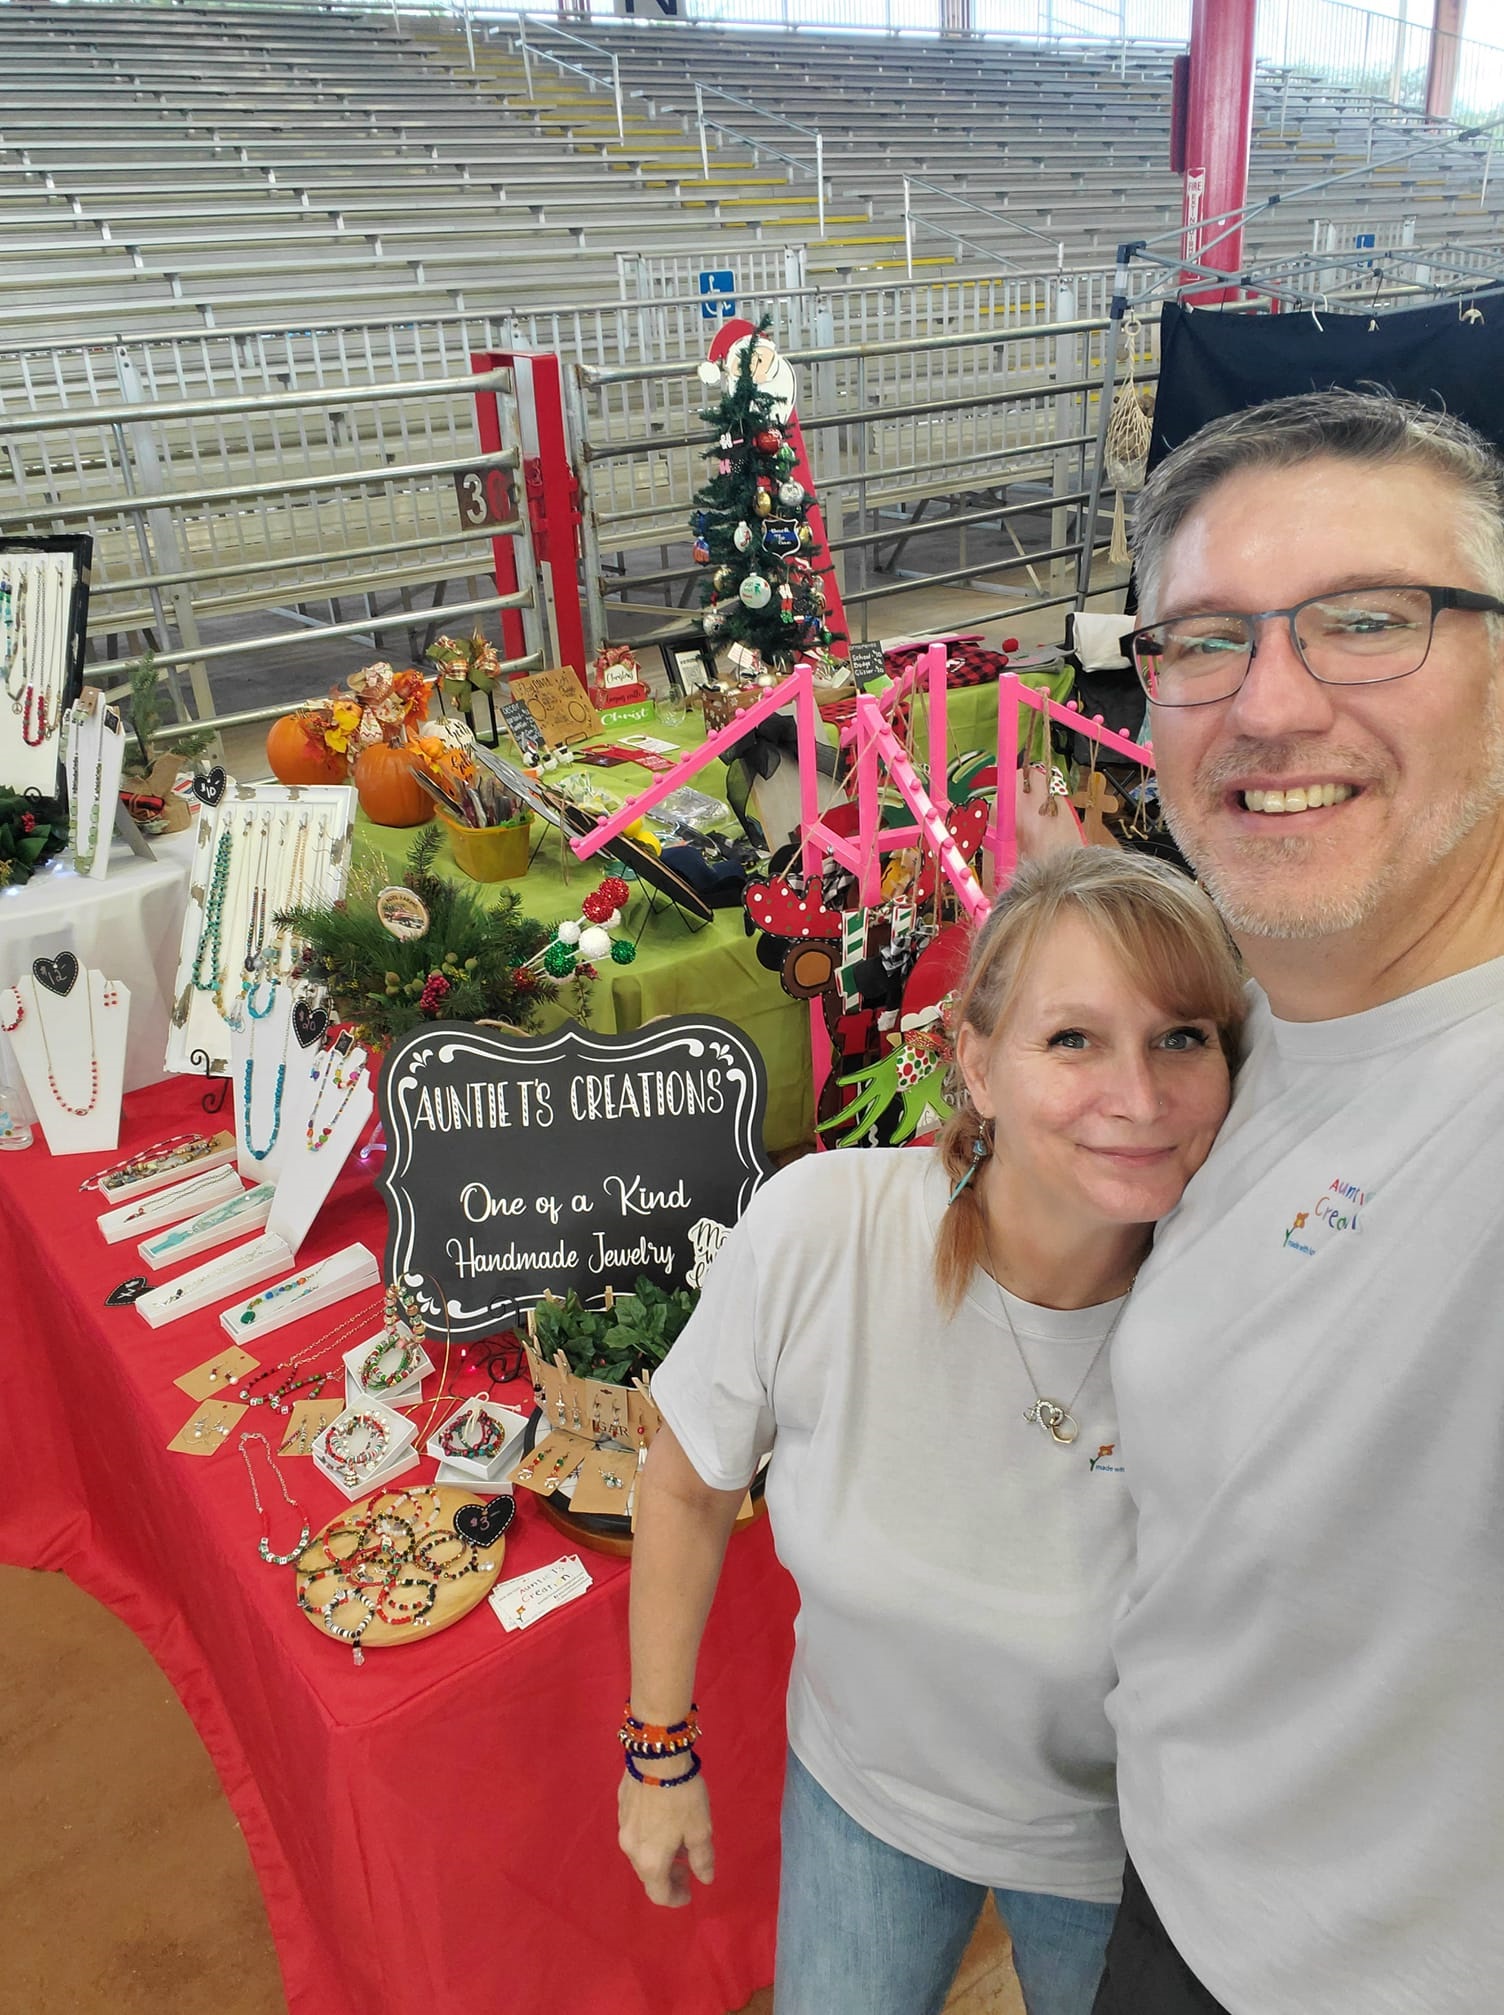 Autnie T and her husband in their booth at a craft show